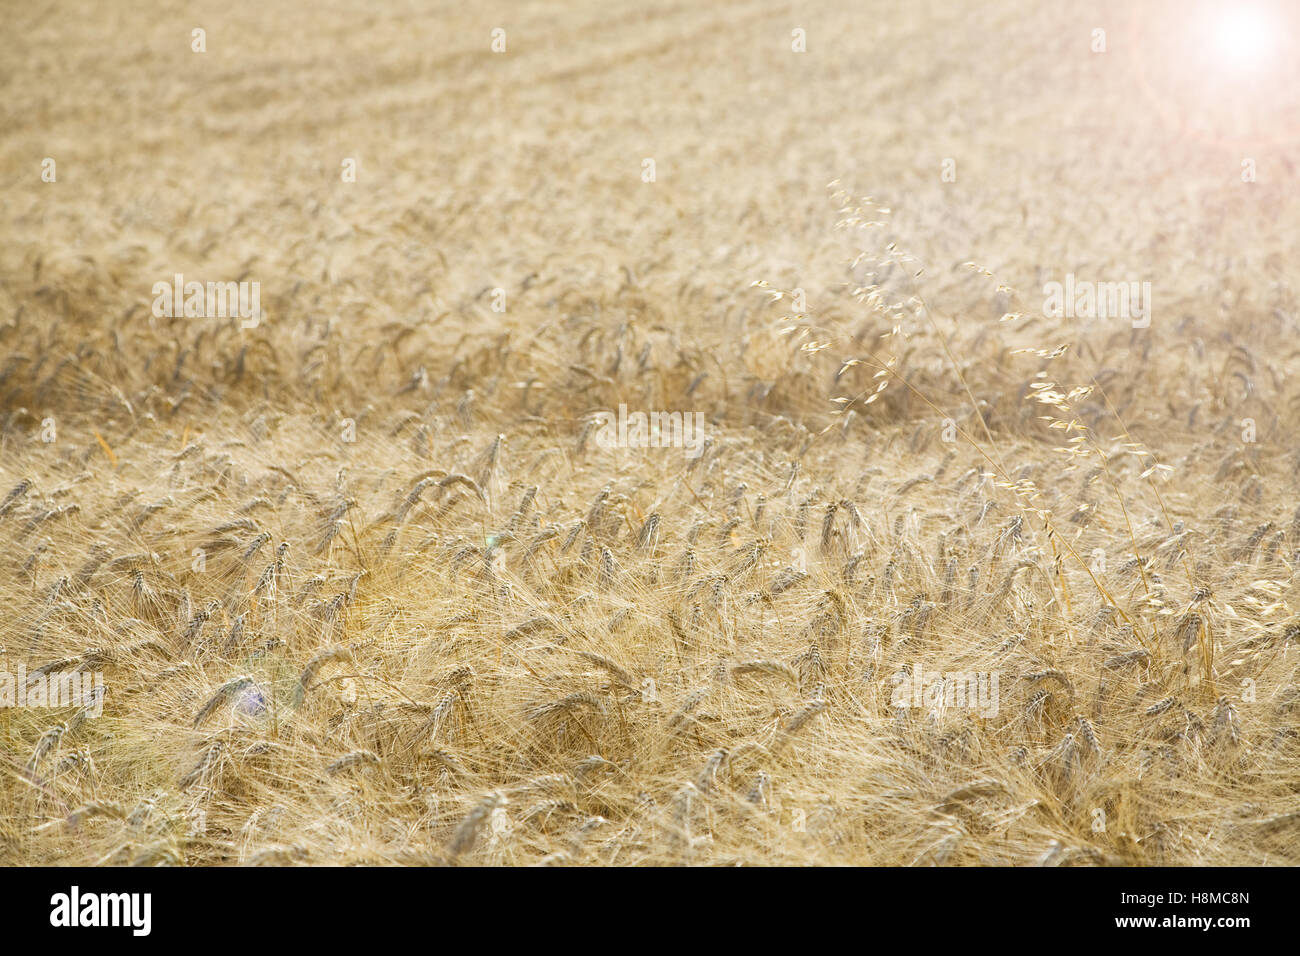 Field of Wheat in morning sunshine Stock Photo